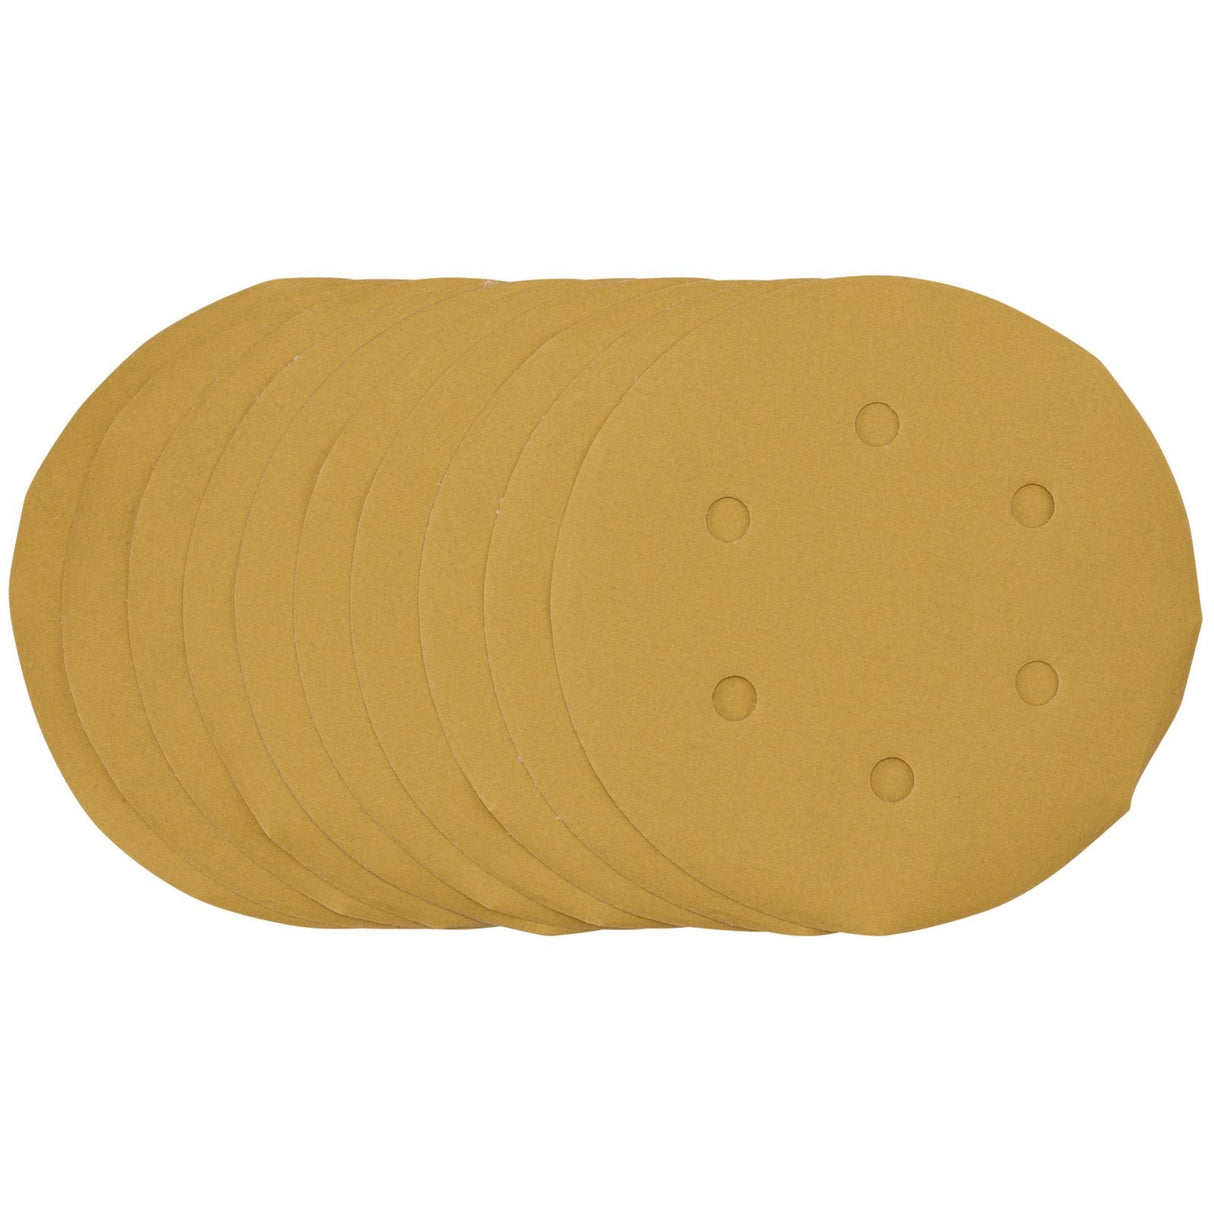 Draper Gold Sanding Discs With Hook & Loop, 150mm, 400 Grit, 6 Dust Extraction Holes (Pack Of 10) - SDHALG150 - Farming Parts